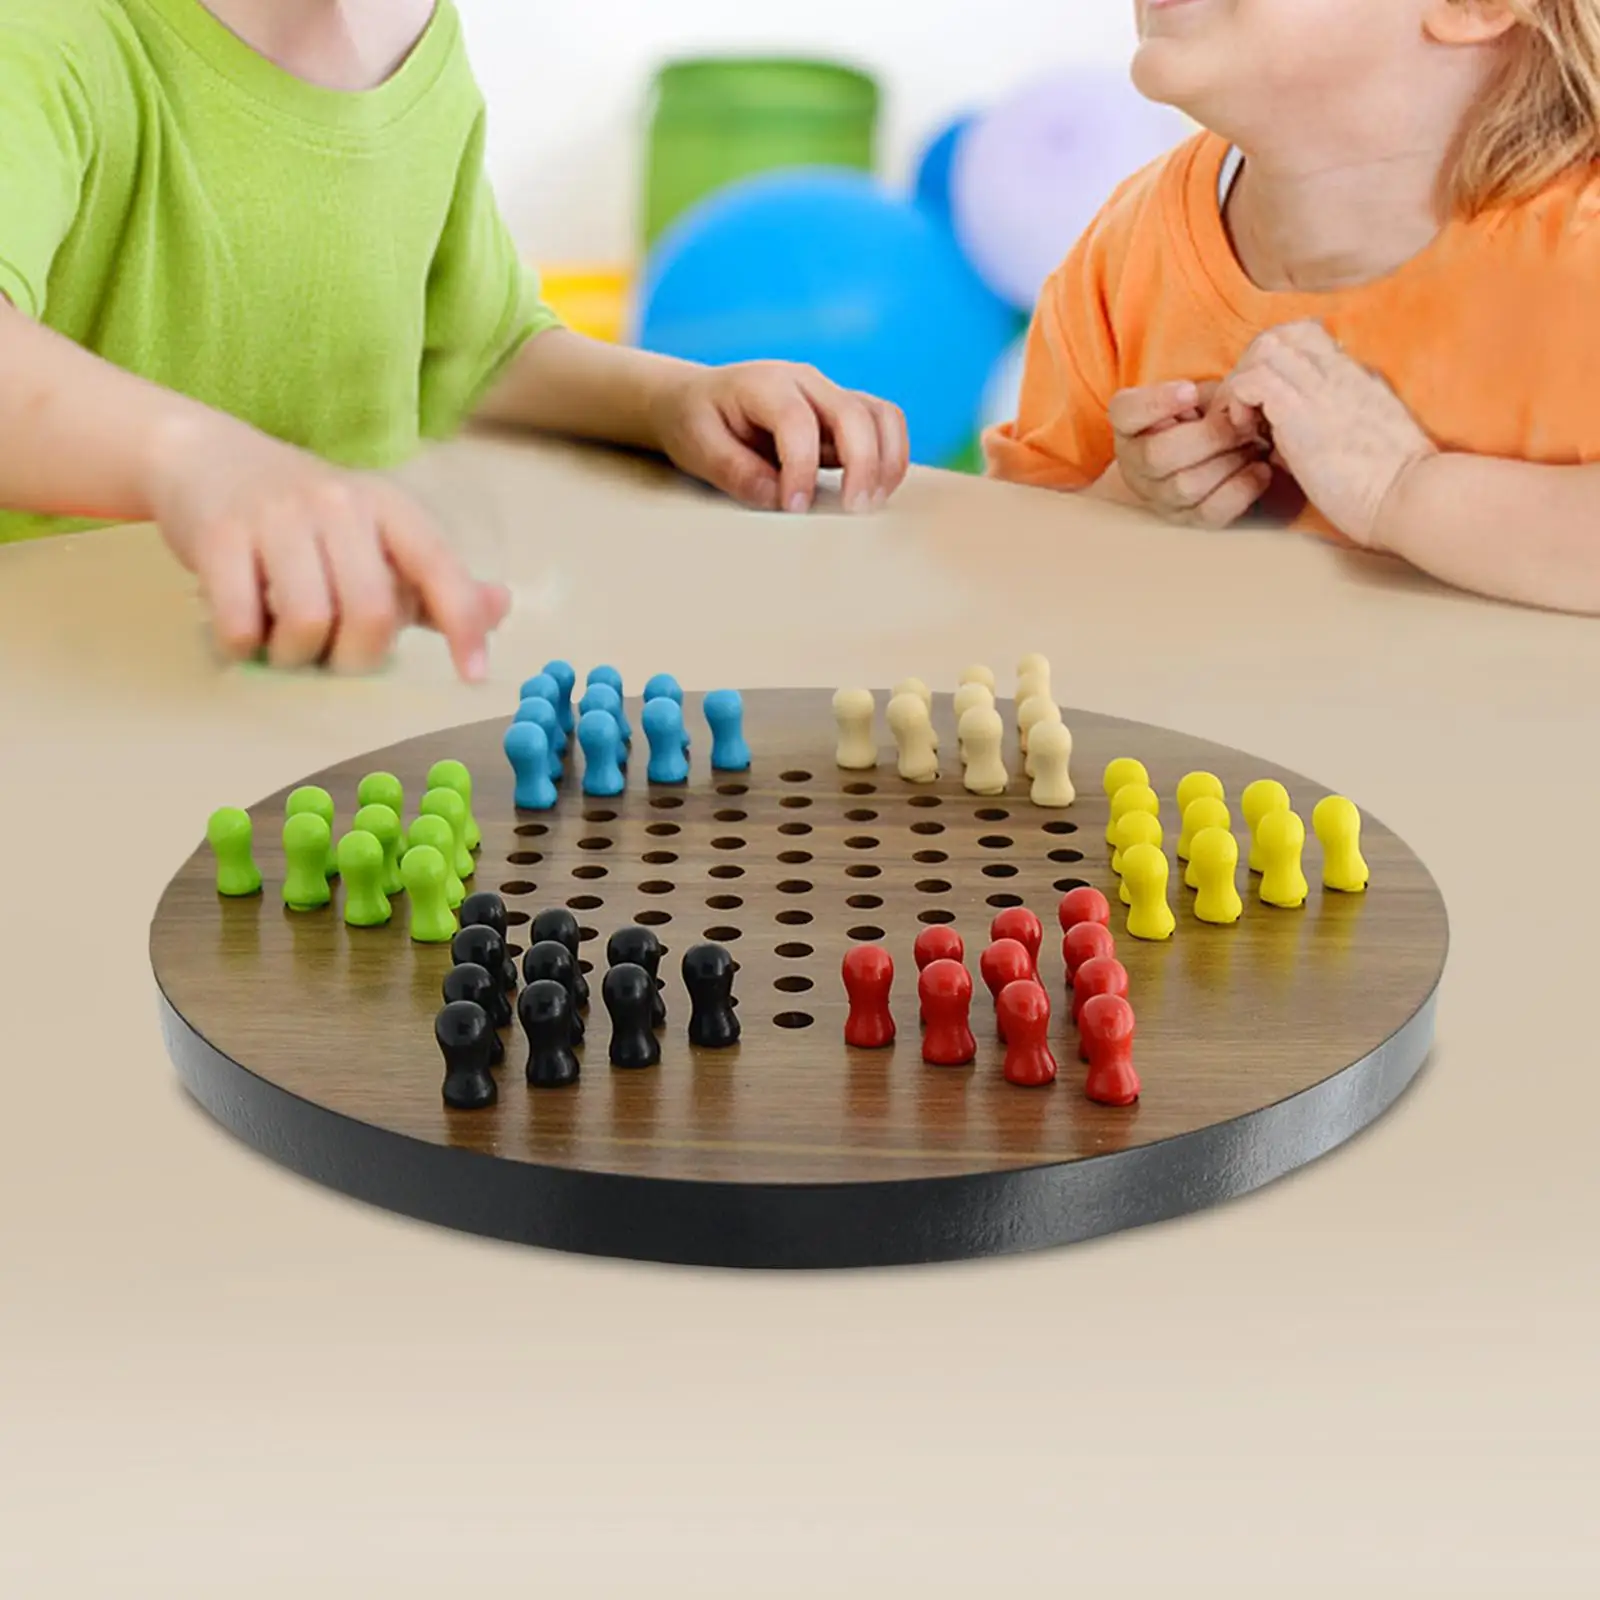 Portable Chinese Checkers with Marbles Chinese Checkers Set for Preschool